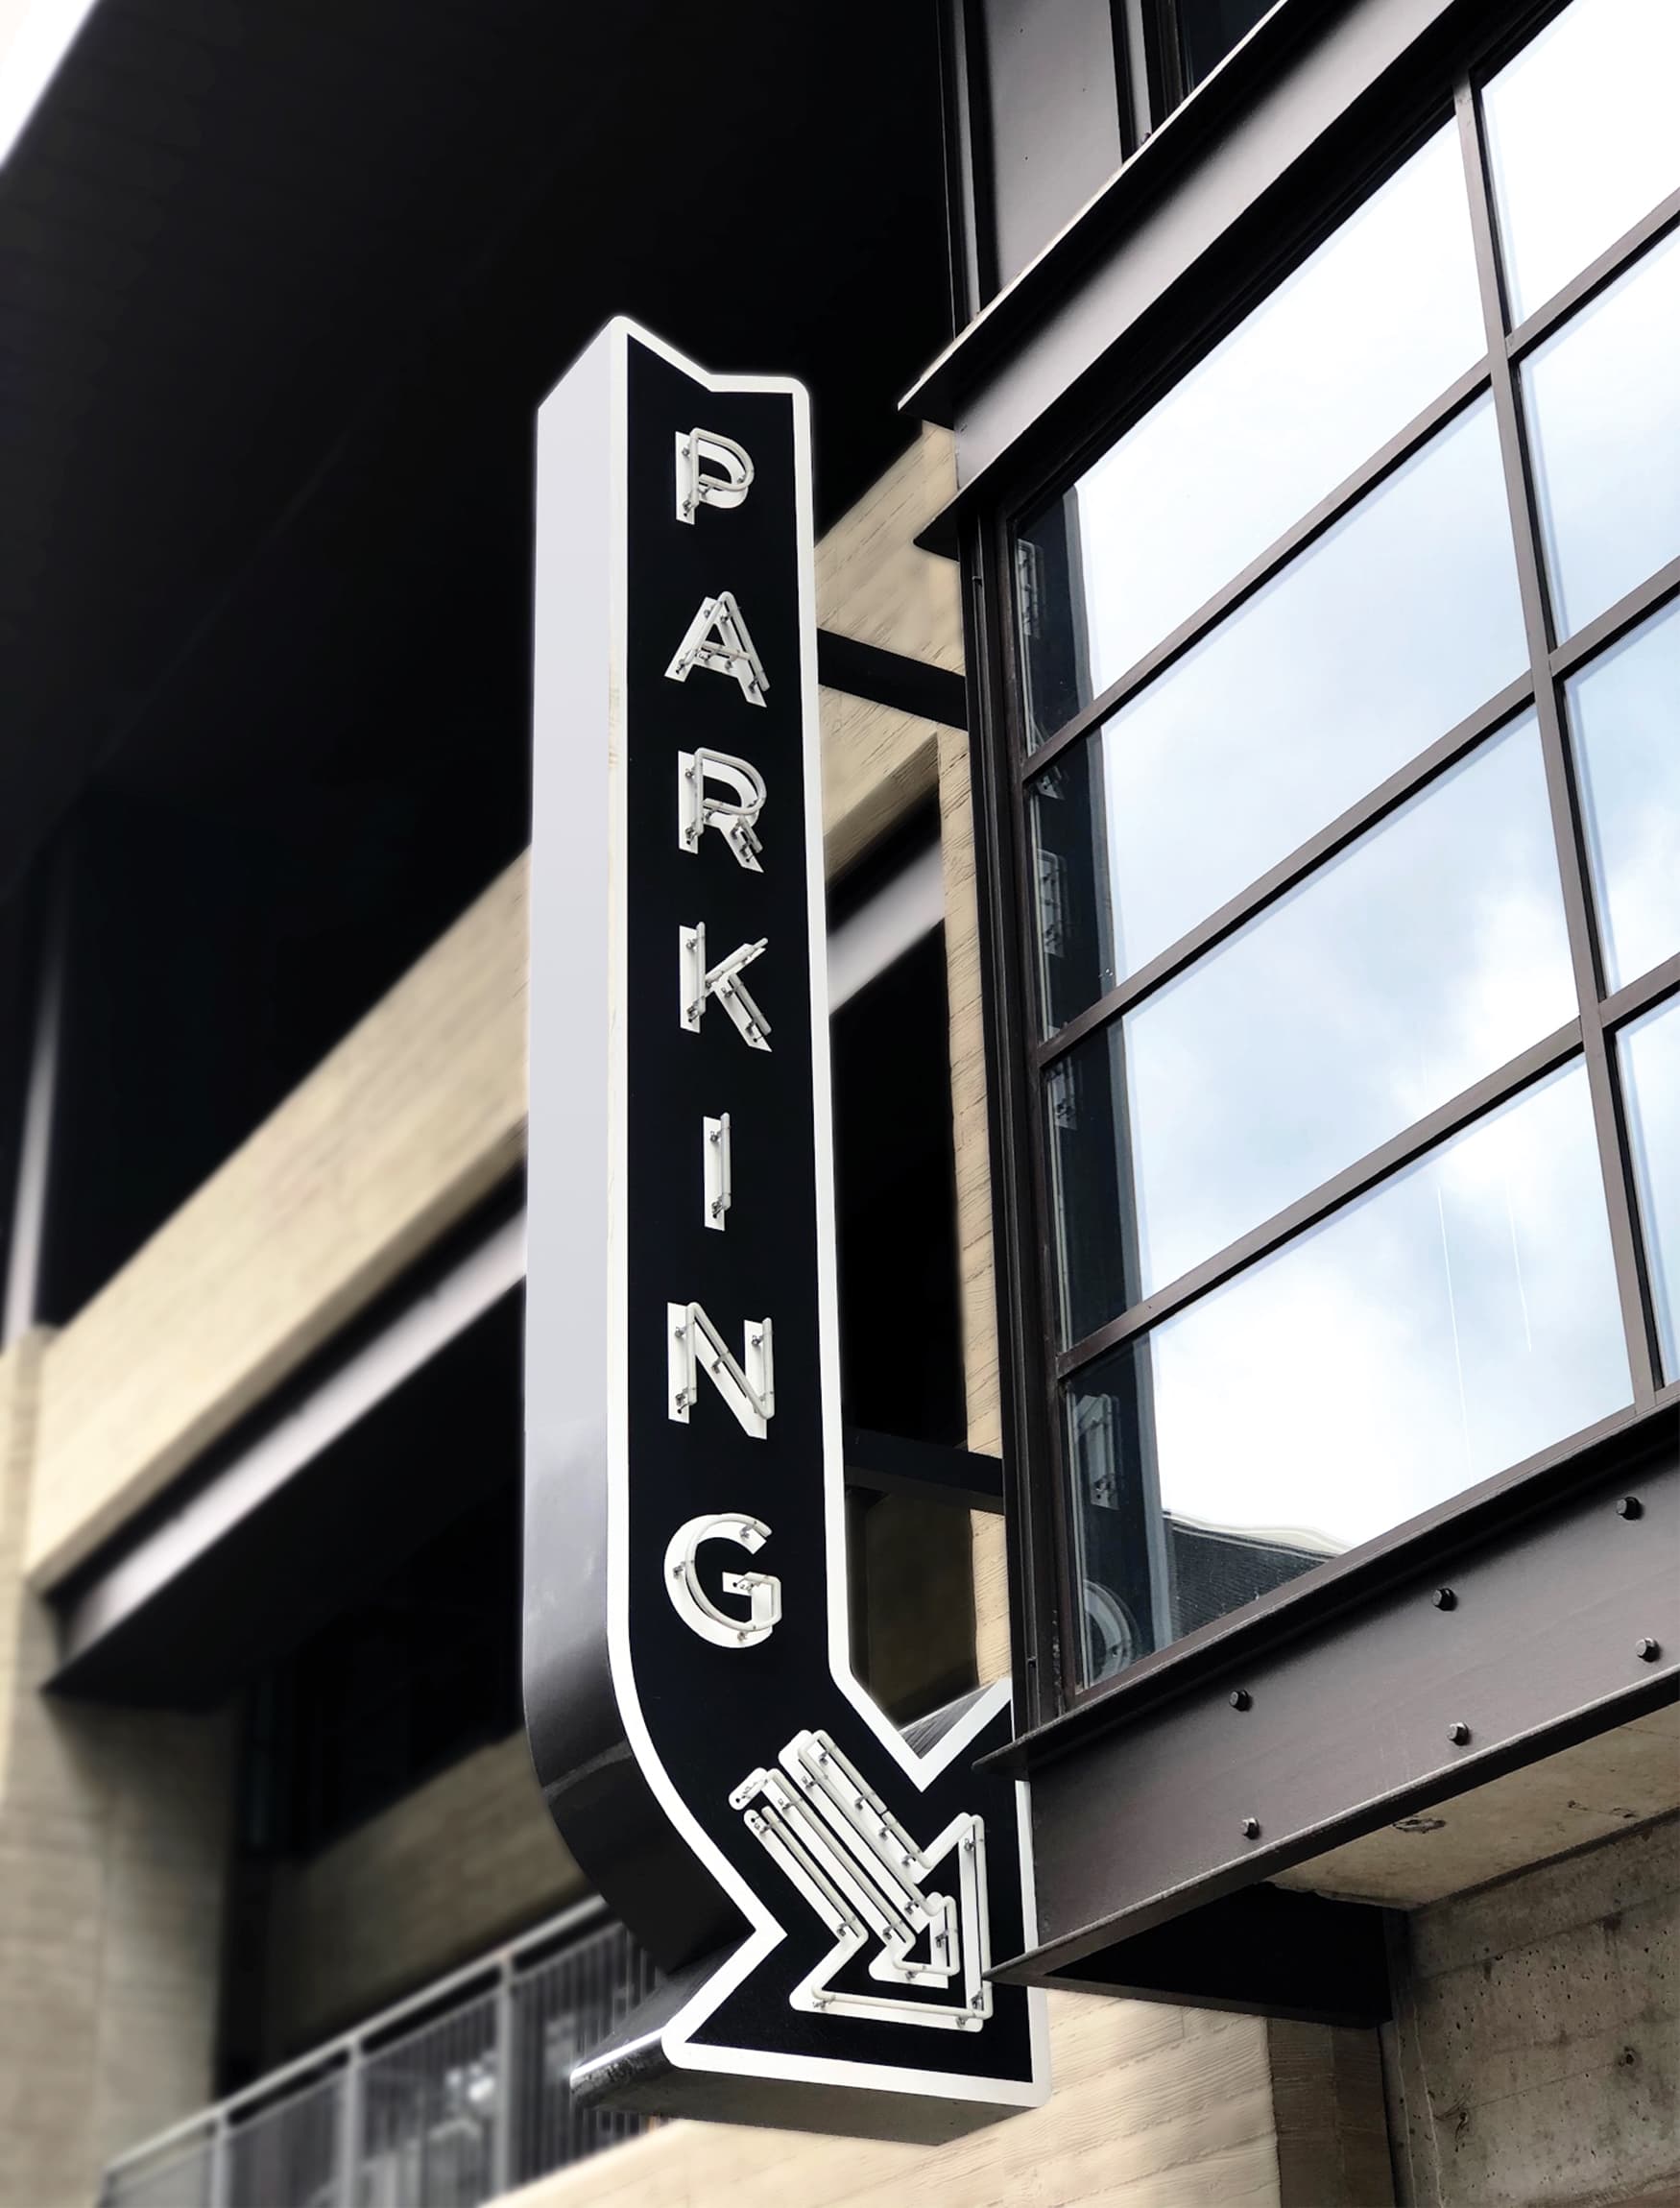 Black vertical letters "Parking" blade sign in the shape of an arrow with a curved arrow head and white graphics and outlining with neon tubing for illumination. Signage and wayfinding for Fifth + Broadway in Nashville, Tennessee by RSM Design